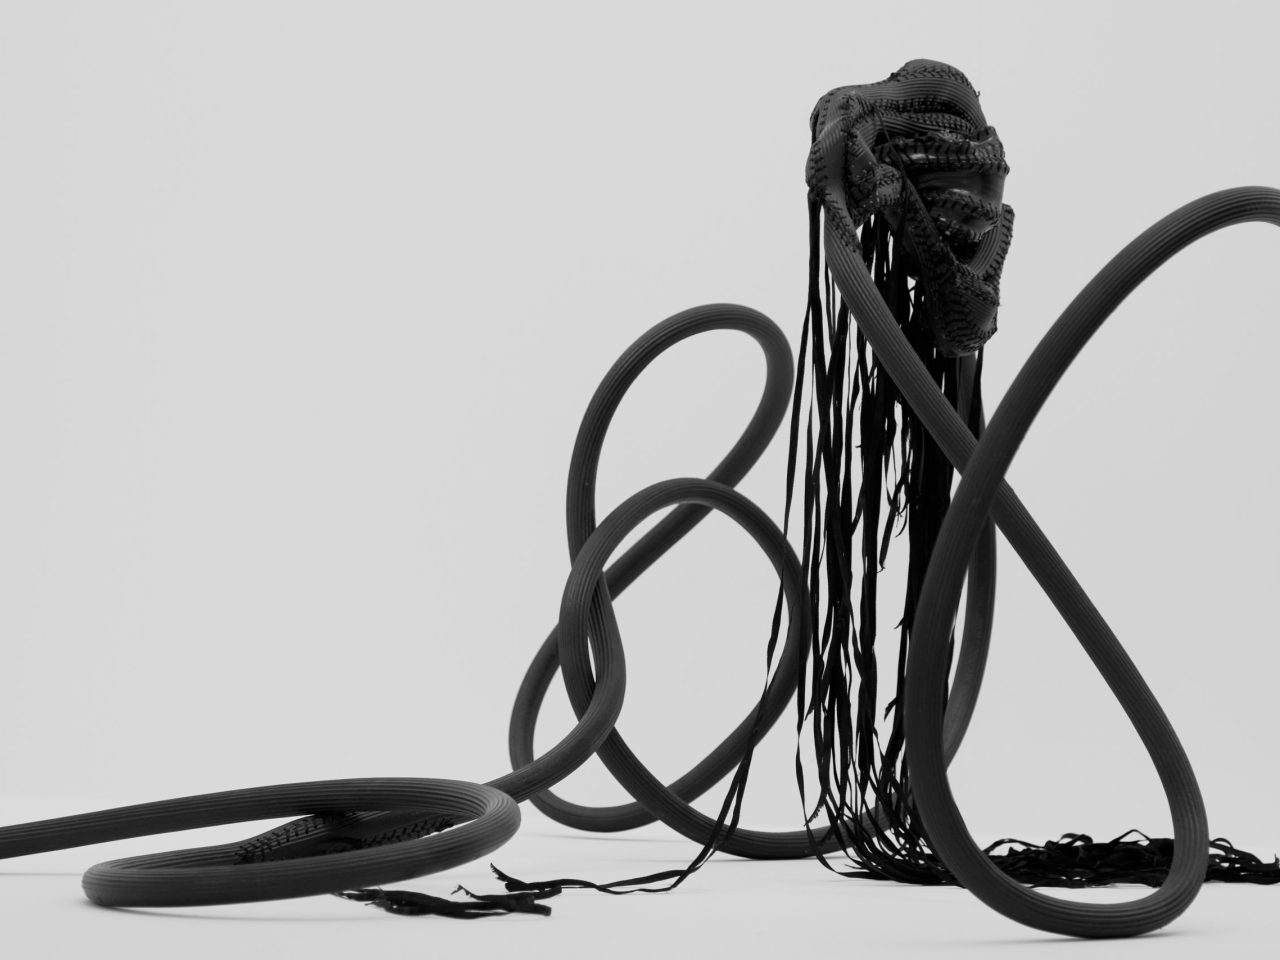 A close up of a sculpture that shows a black tangled hosepipe thanding up with drapped ribbons from its highest point.